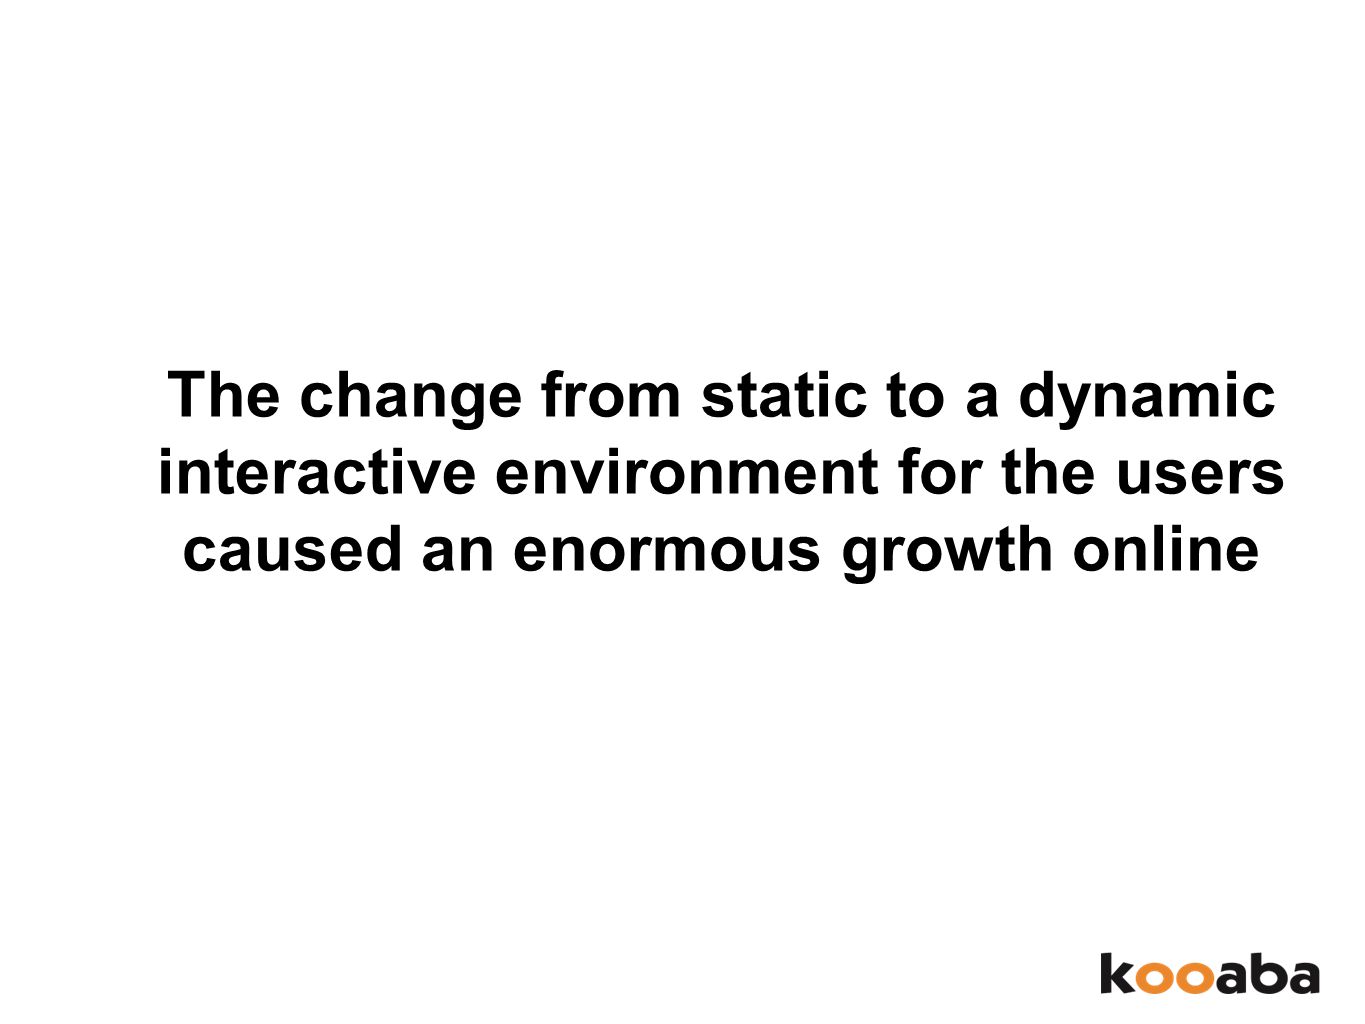 The change from static to a dynamic interactive environment for the users caused an enormous growth online